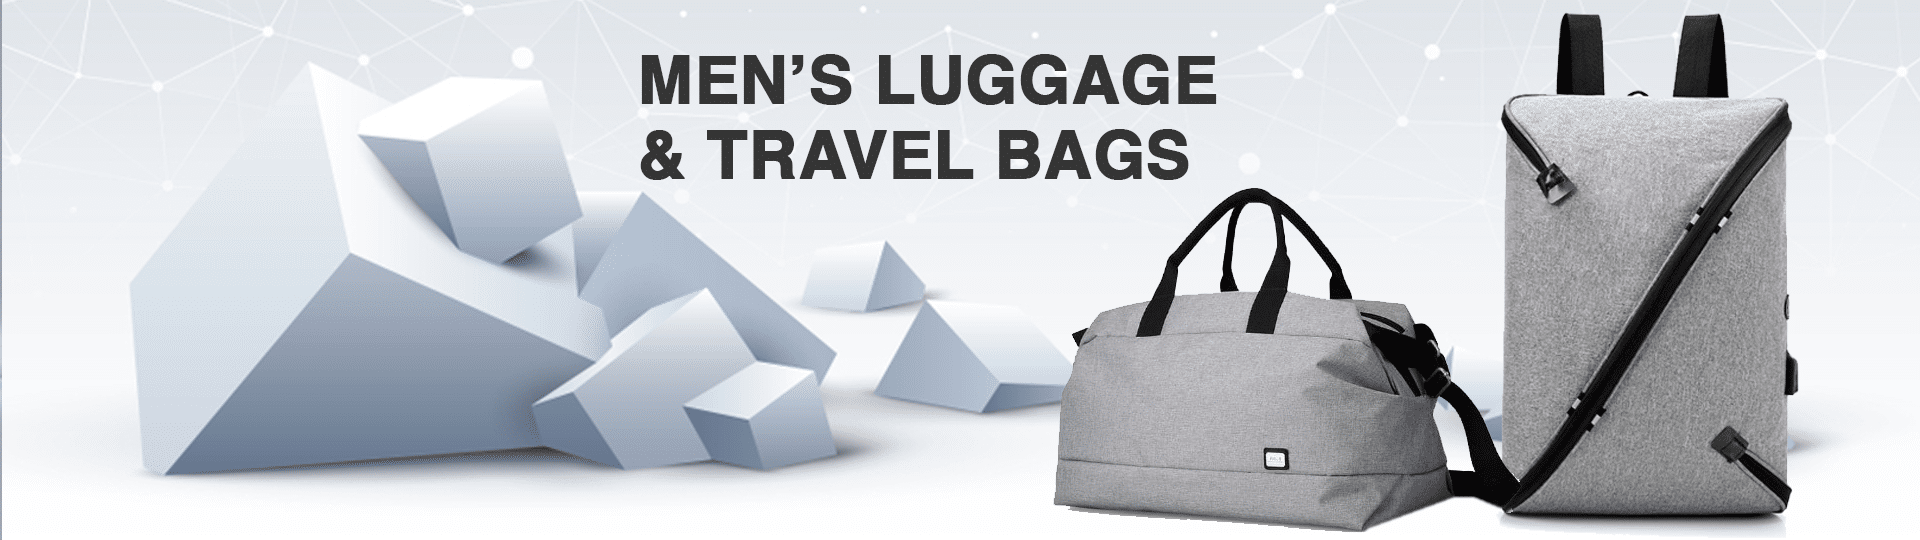 Men’s_Luggage_Travel_Bags